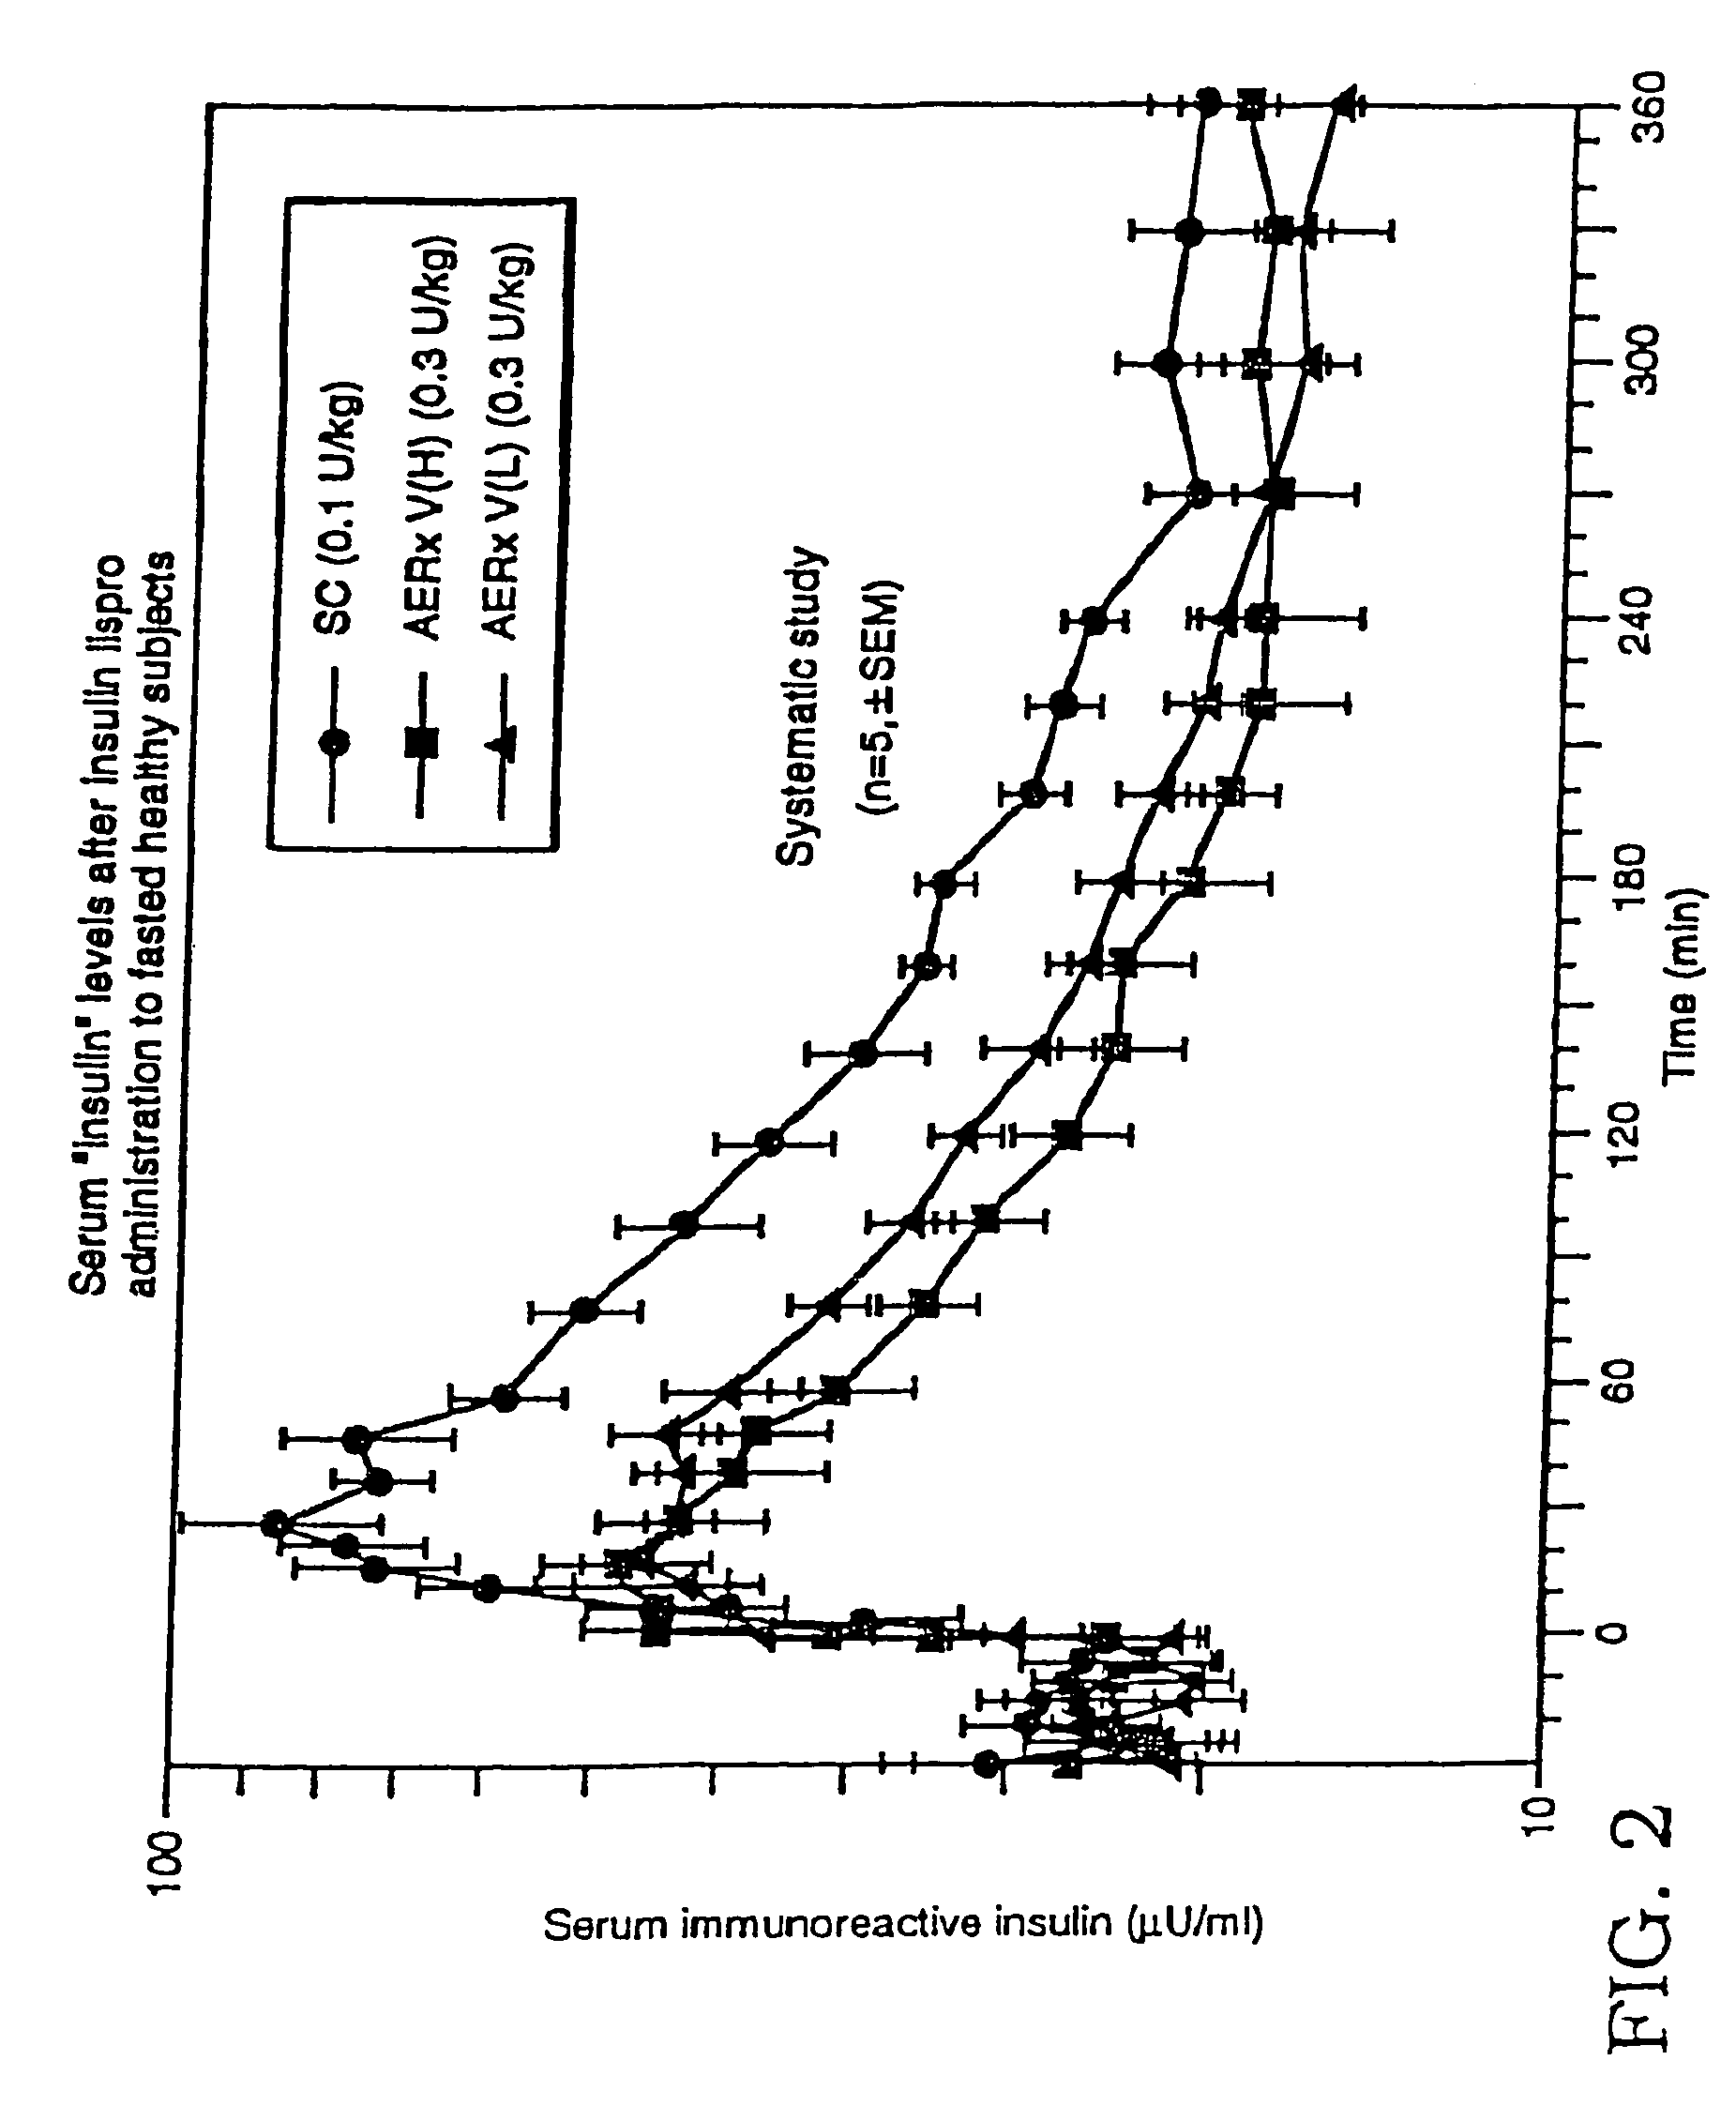 Method of use of monomeric insulin as a means for improving the reproducibility of inhaled insulin